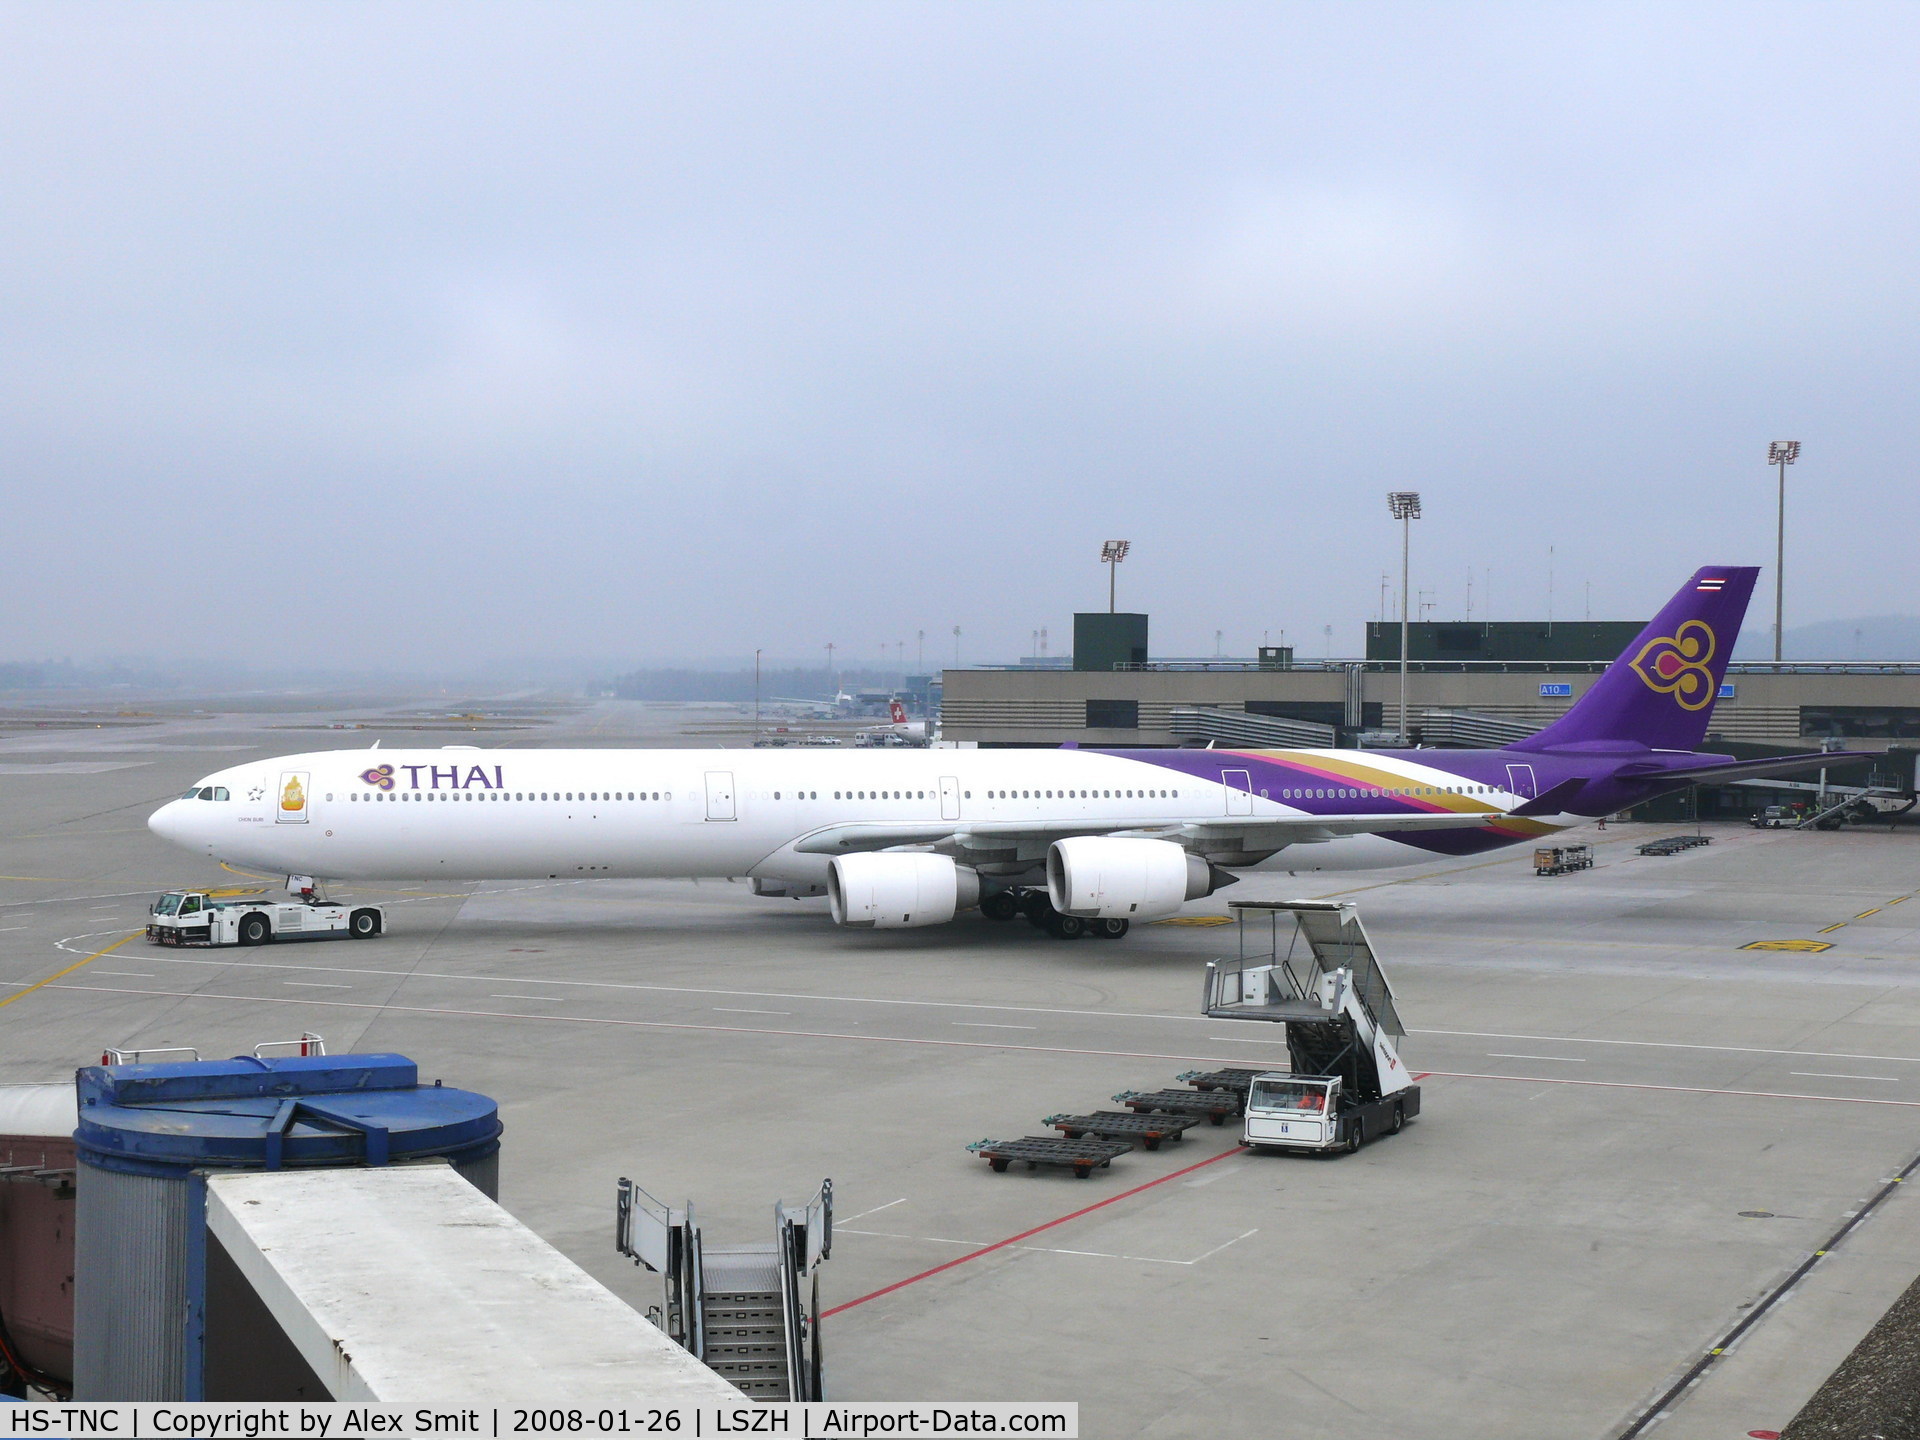 HS-TNC, 2005 Airbus A340-642 C/N 689, Pushed back